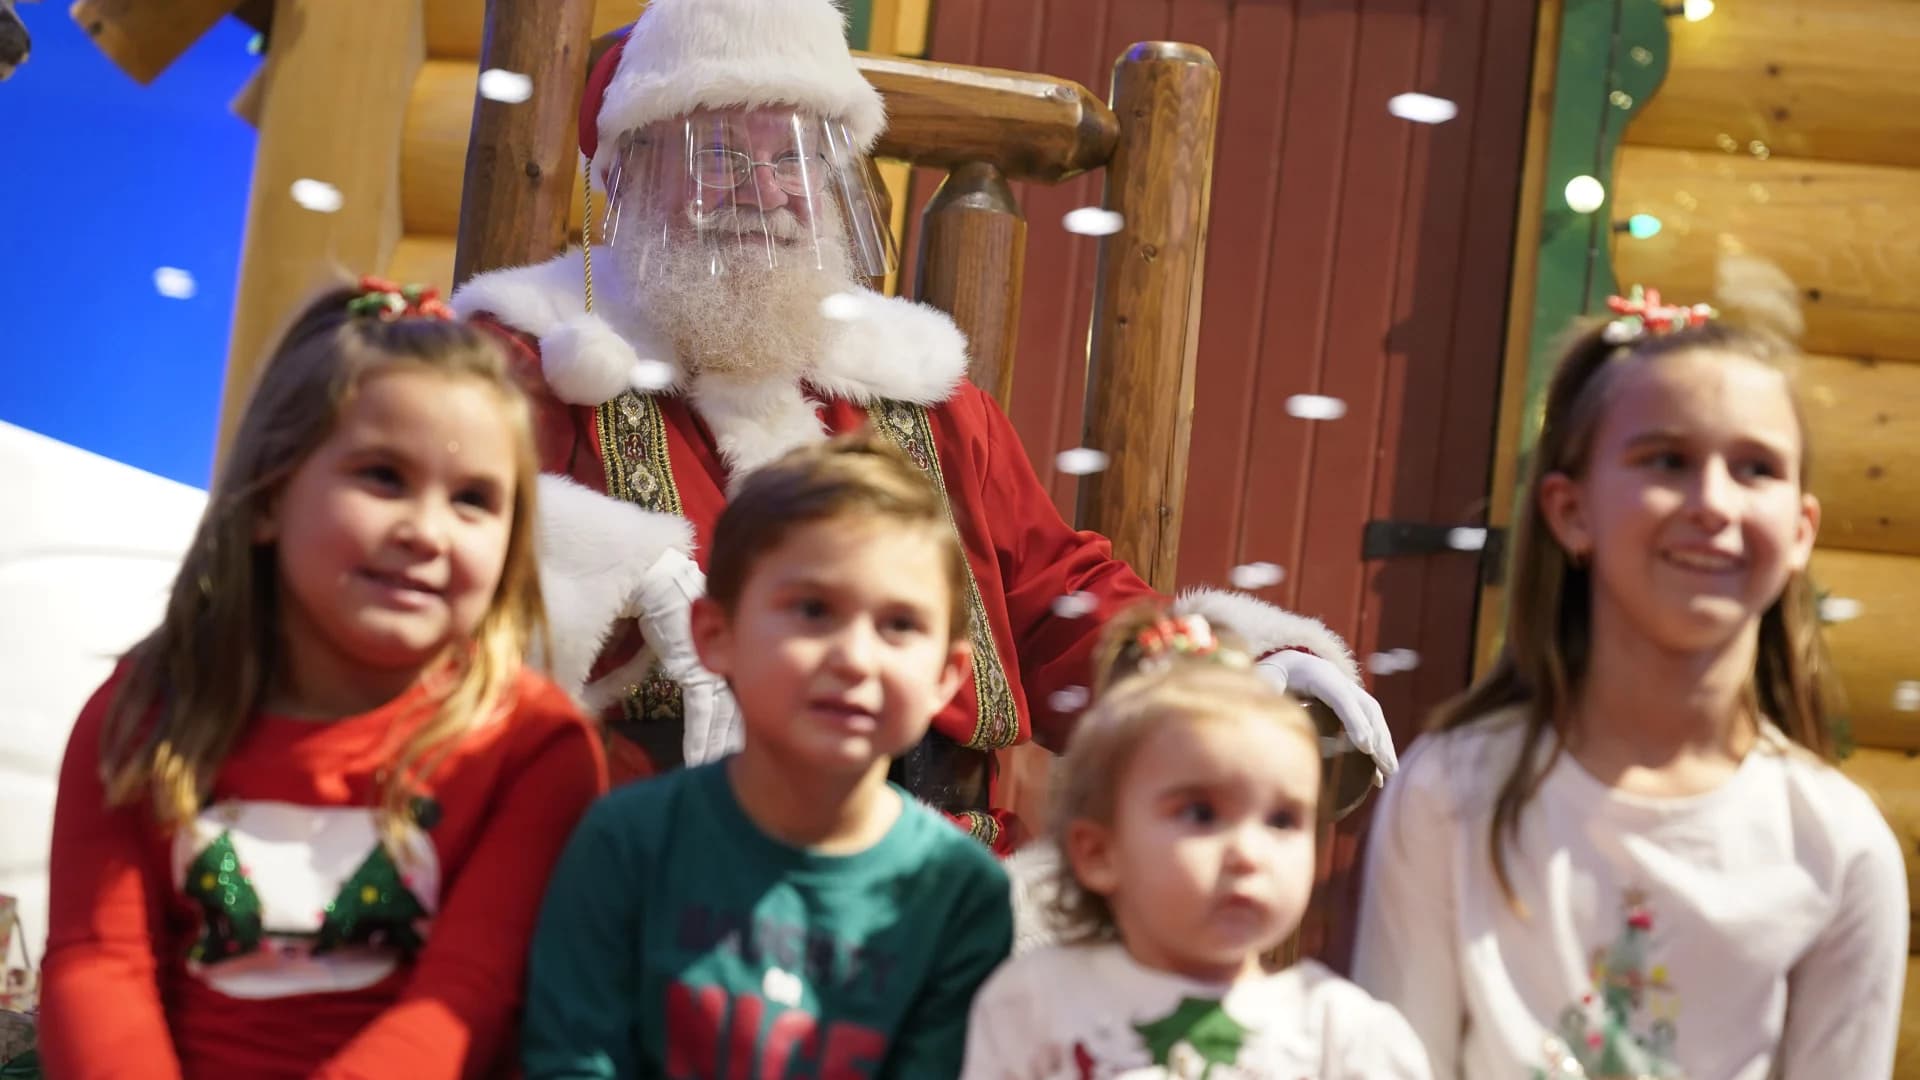 9 safe ways to interact with Santa before Christmas